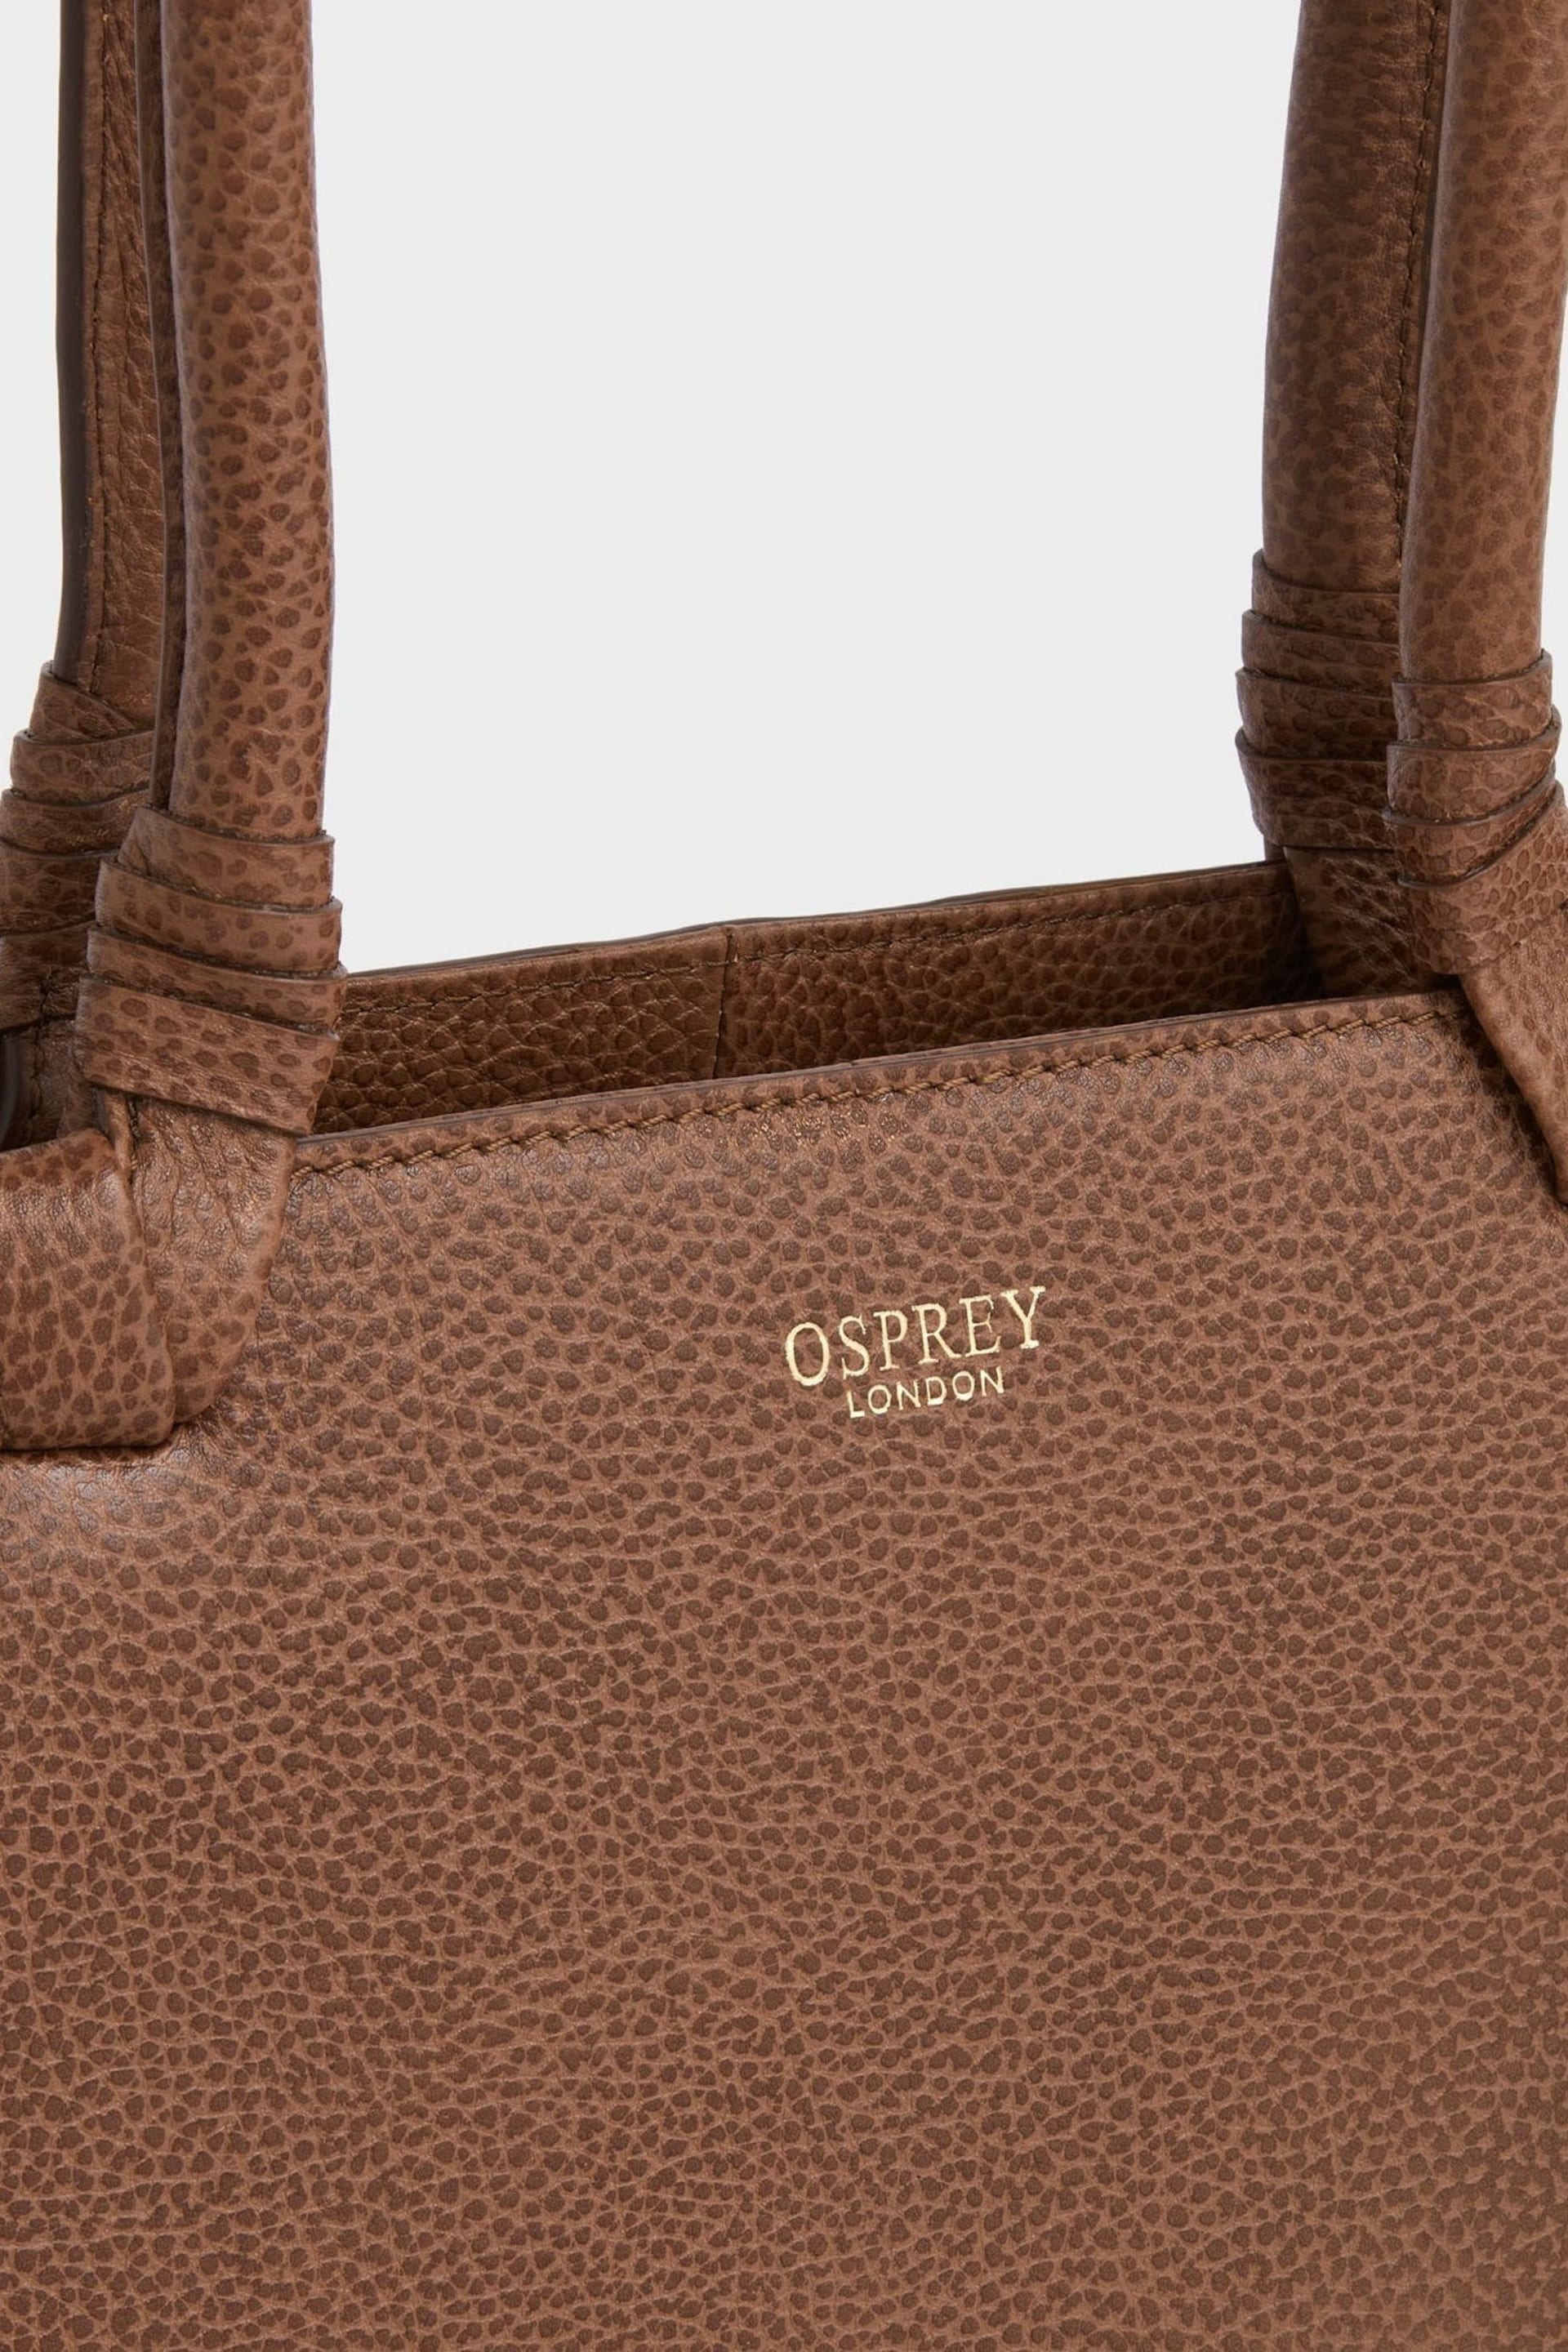 OSPREY LONDON Tan The Collier Leather Shoulder Tote Bag - Image 5 of 5